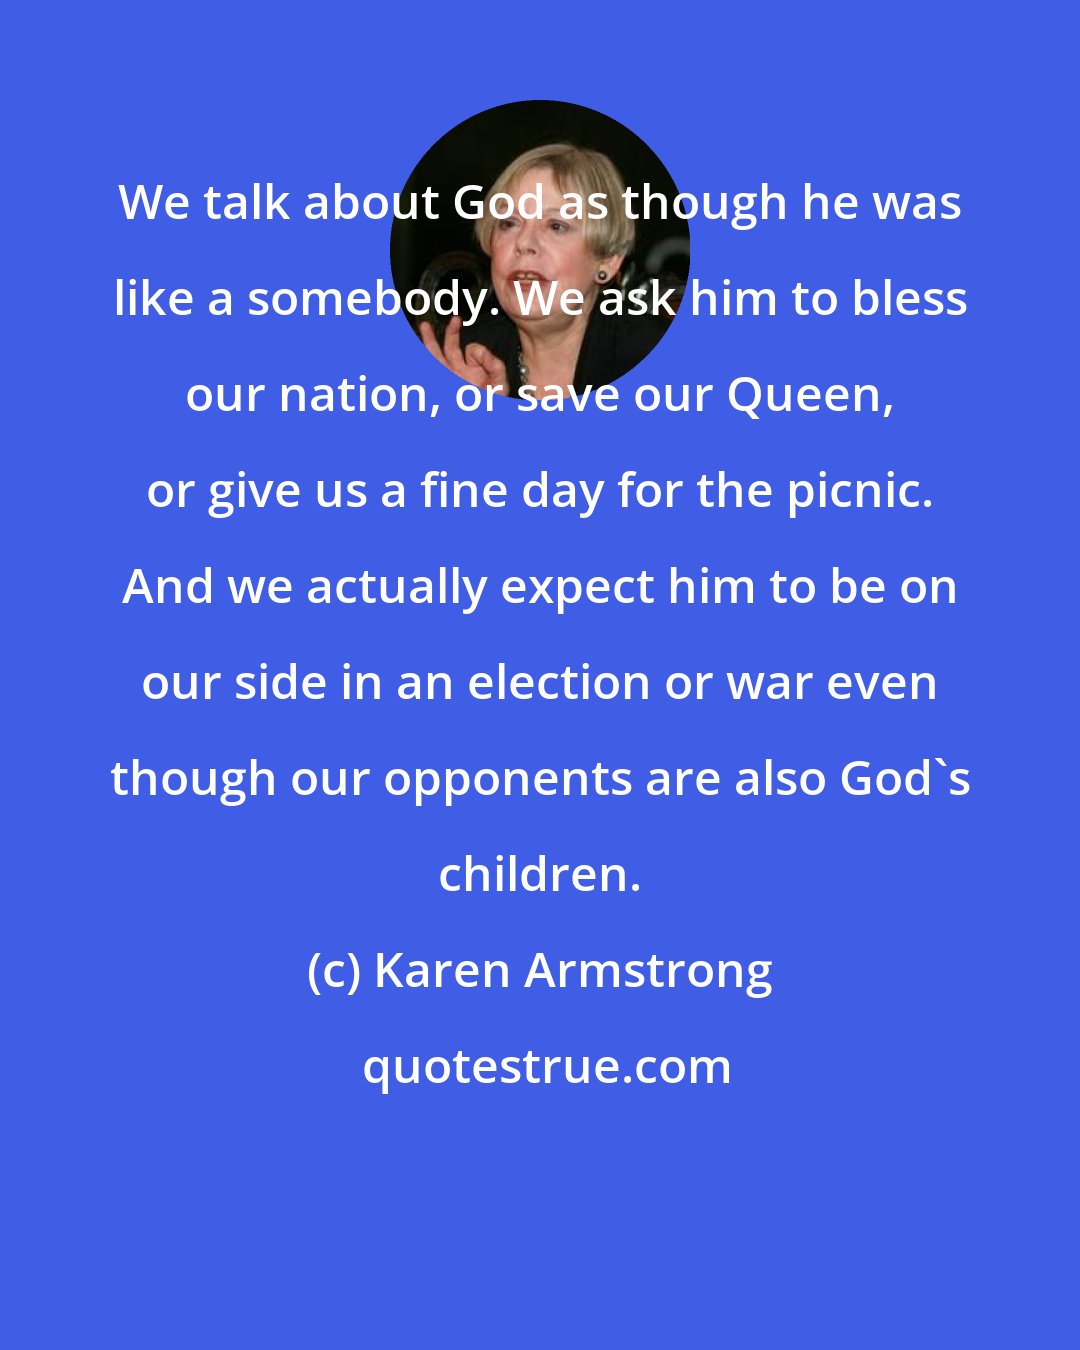 Karen Armstrong: We talk about God as though he was like a somebody. We ask him to bless our nation, or save our Queen, or give us a fine day for the picnic. And we actually expect him to be on our side in an election or war even though our opponents are also God's children.